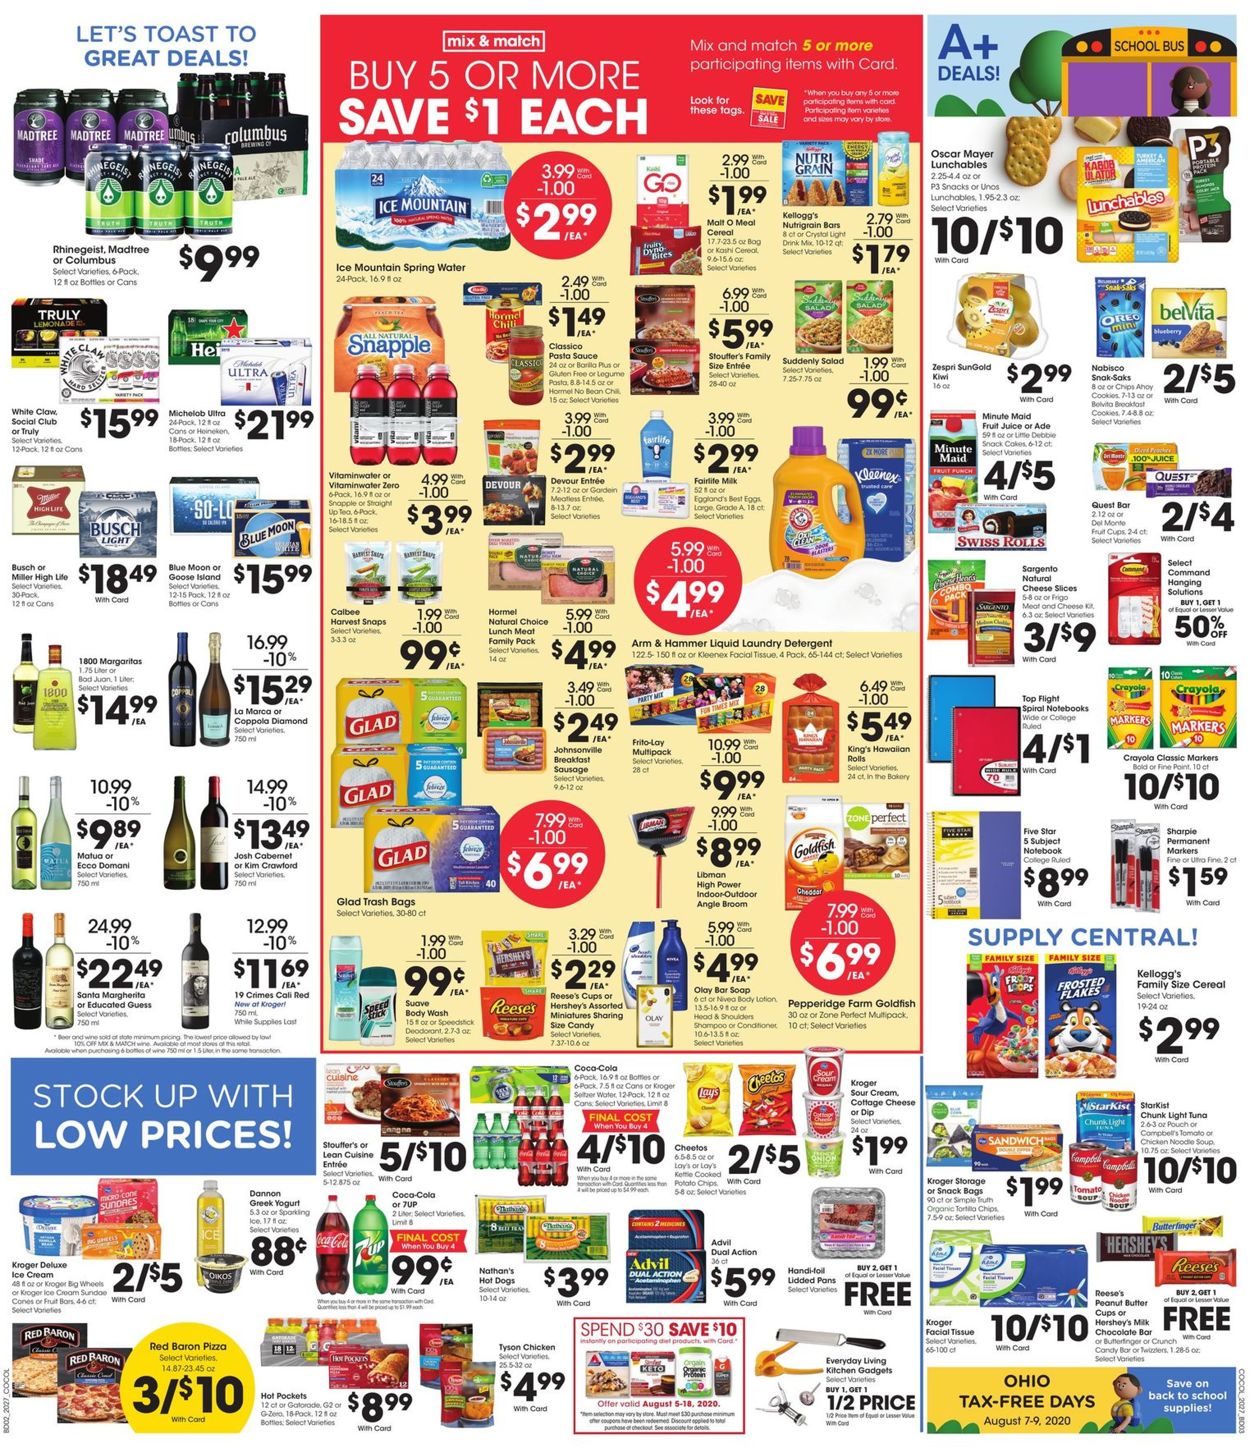 Kroger Current weekly ad 08/05 - 08/11/2020 [4] - frequent-ads.com